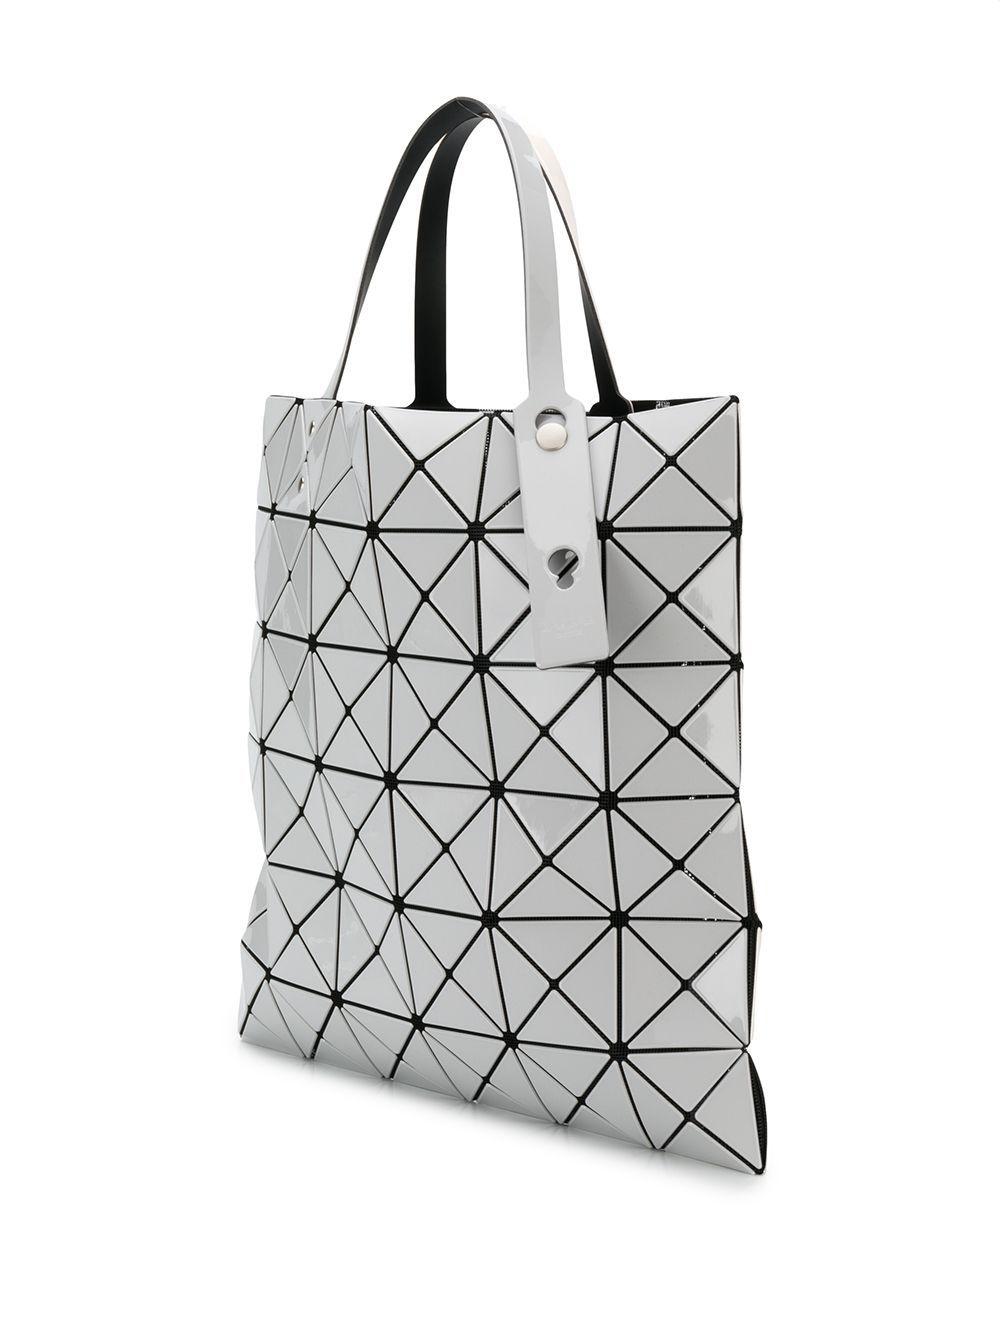 Bao Bao Issey Miyake Synthetic Prism Tote Bag in Grey (Gray) - Lyst